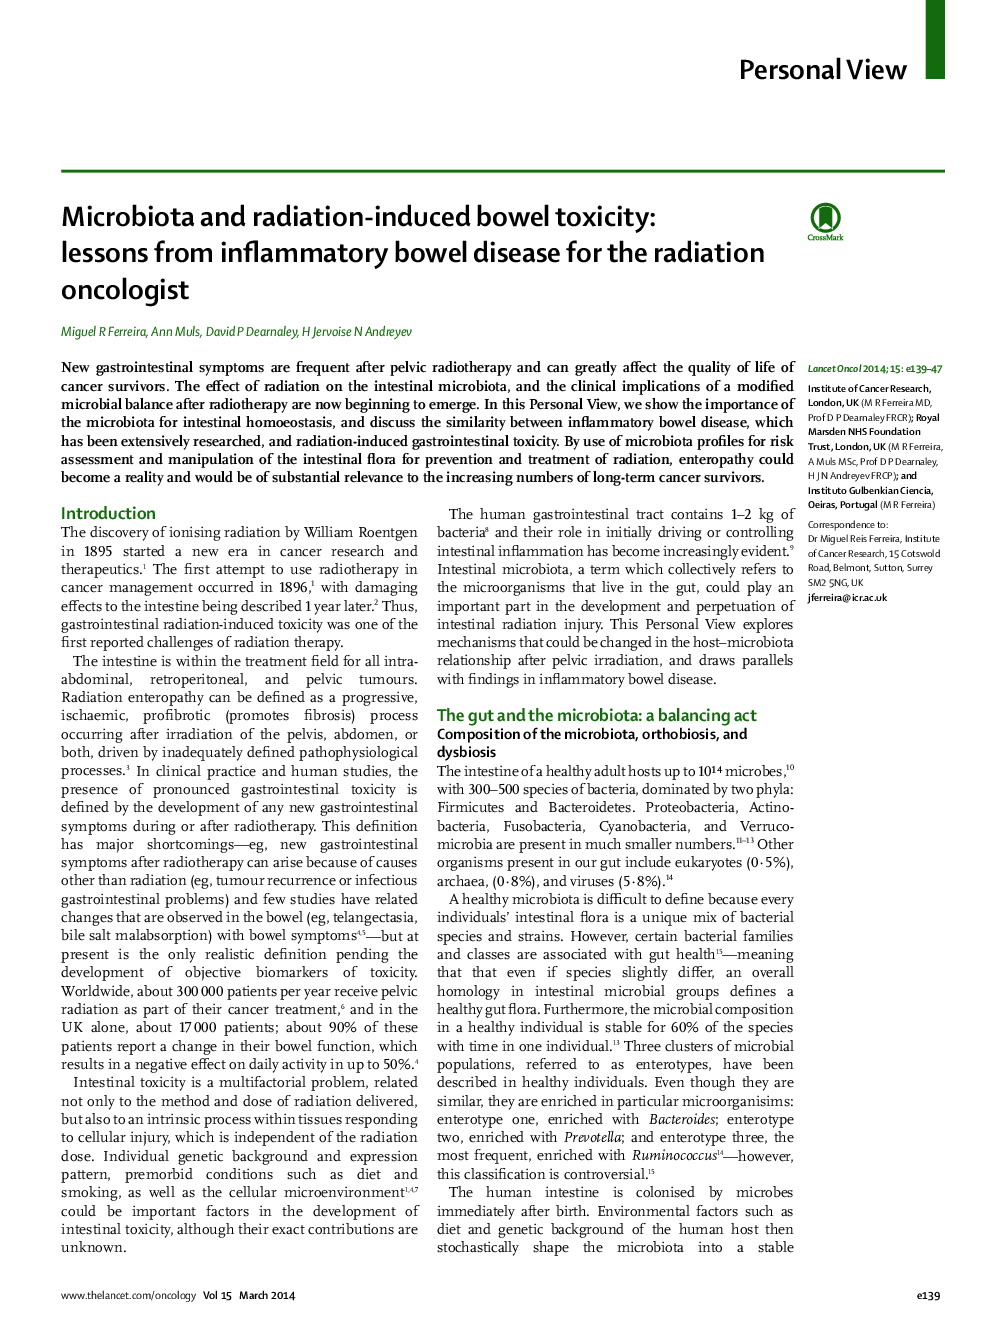 Microbiota and radiation-induced bowel toxicity: lessons from inflammatory bowel disease for the radiation oncologist